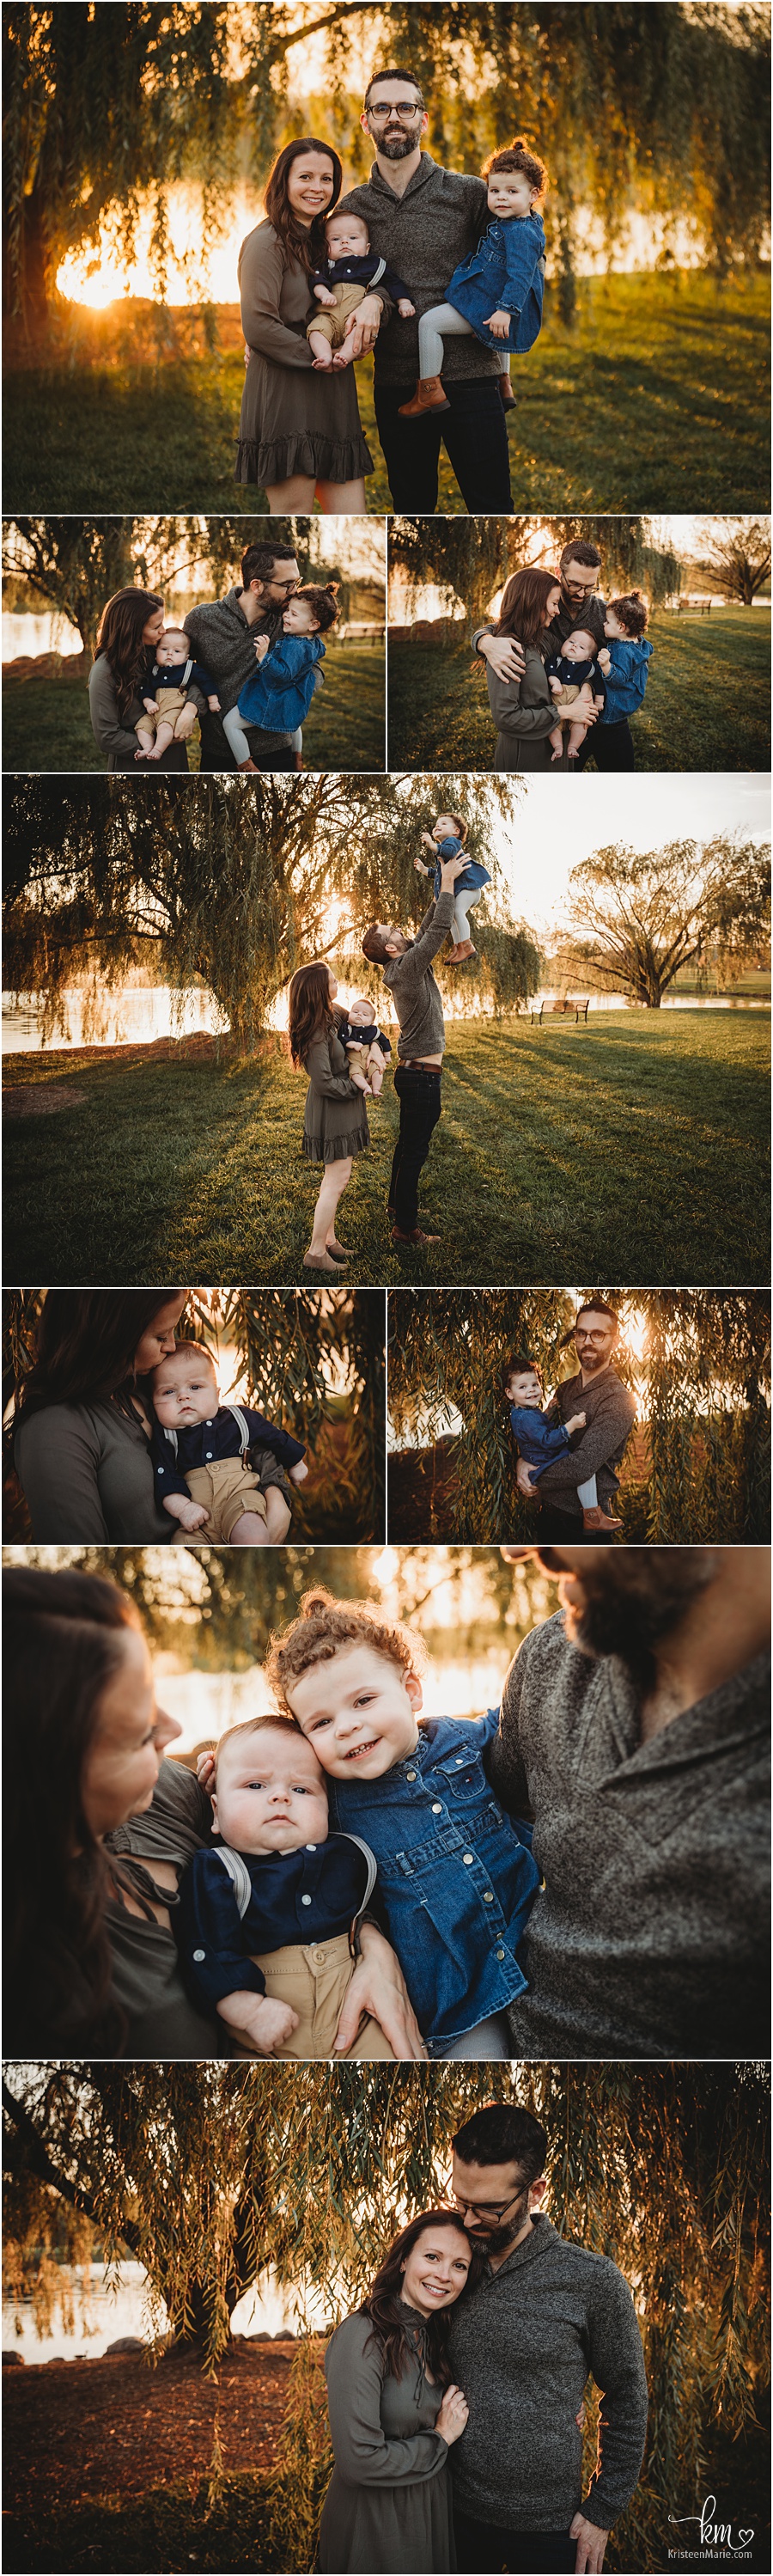 Family photography in Carmel, Indiana - weeping willow - stunning light